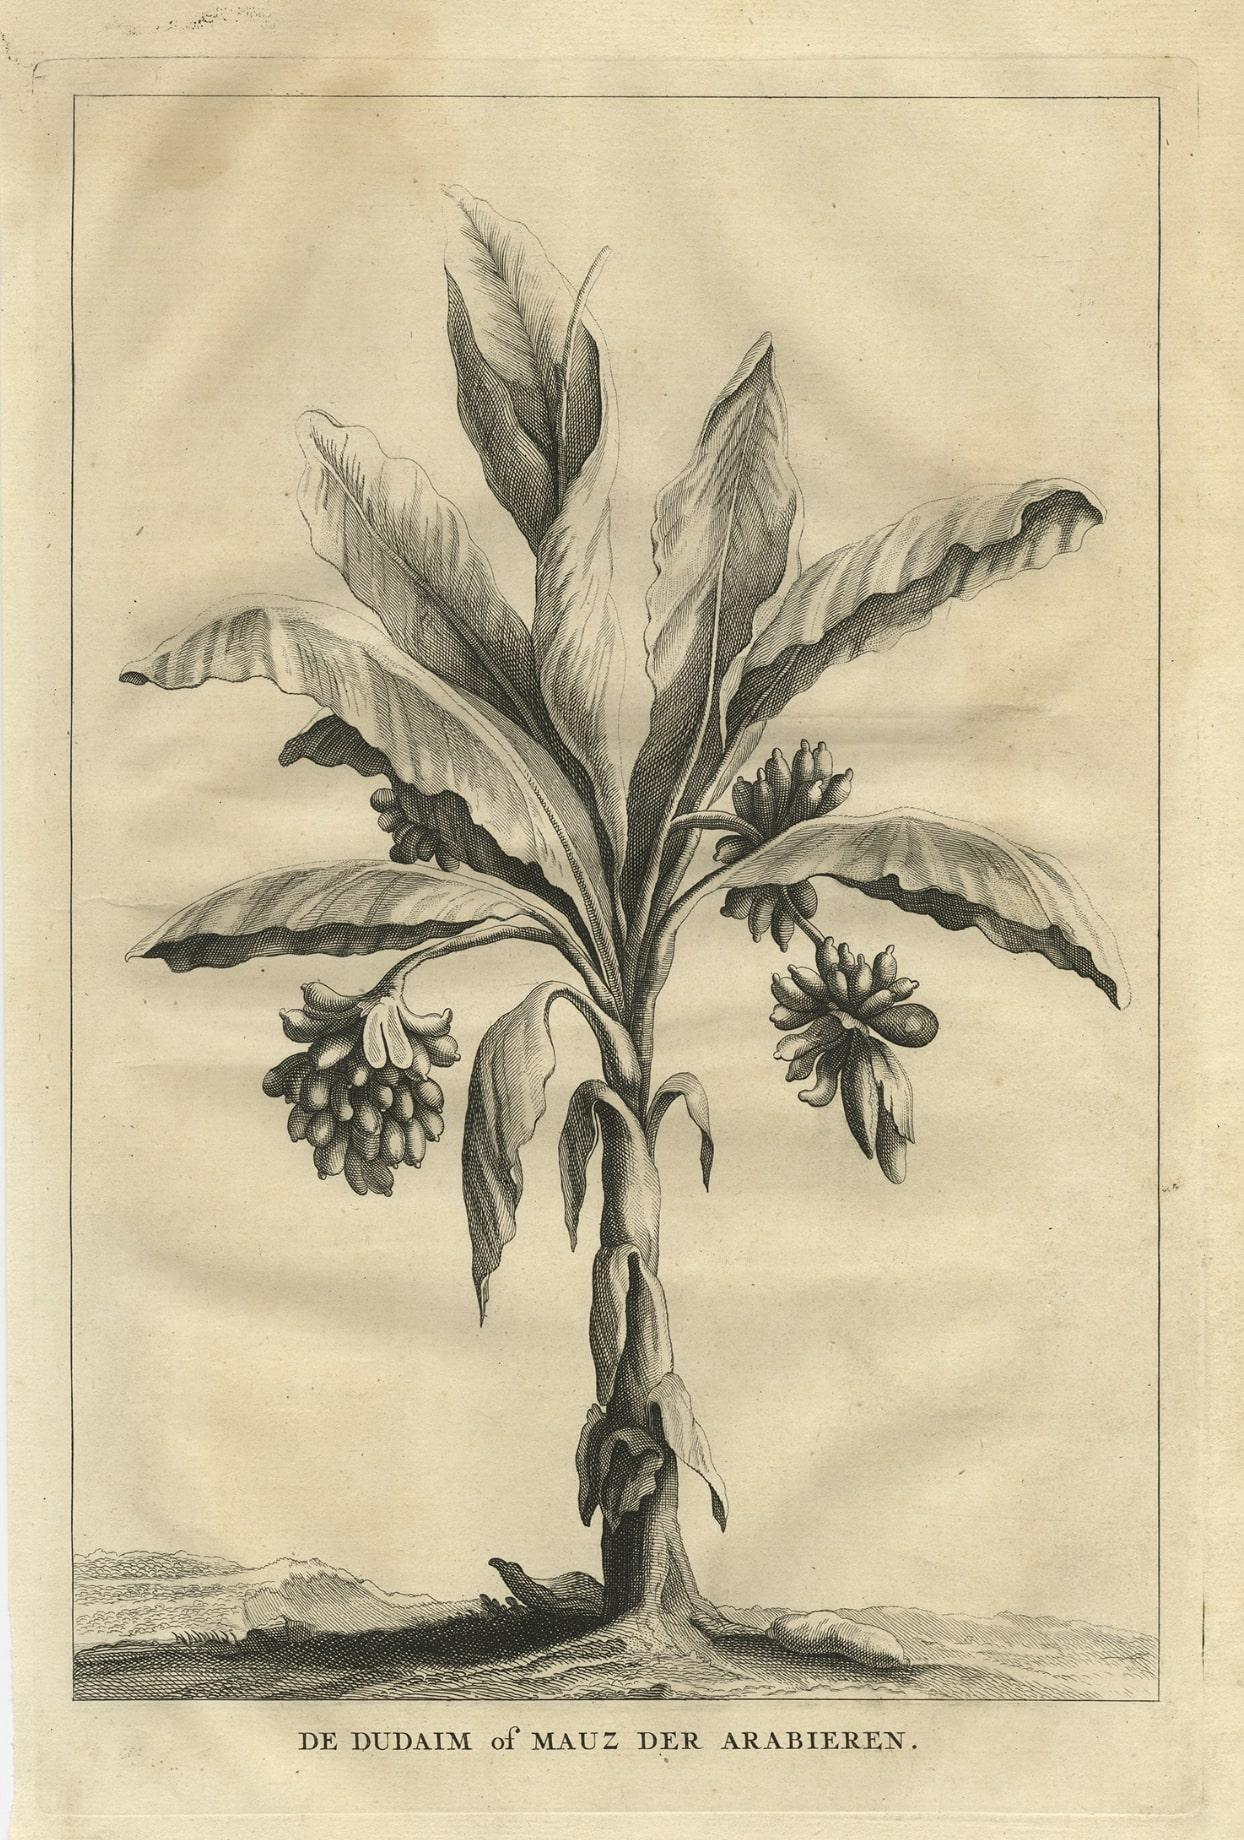 Antique print, titled: 'De Dudaim of Mauz der Arabieren' - 

This original old antique print shows the Dudaim or Mauz of the Arabs. Mandragora officinarum is a species of the plant genus mandrake. Historically, it has been associated with a